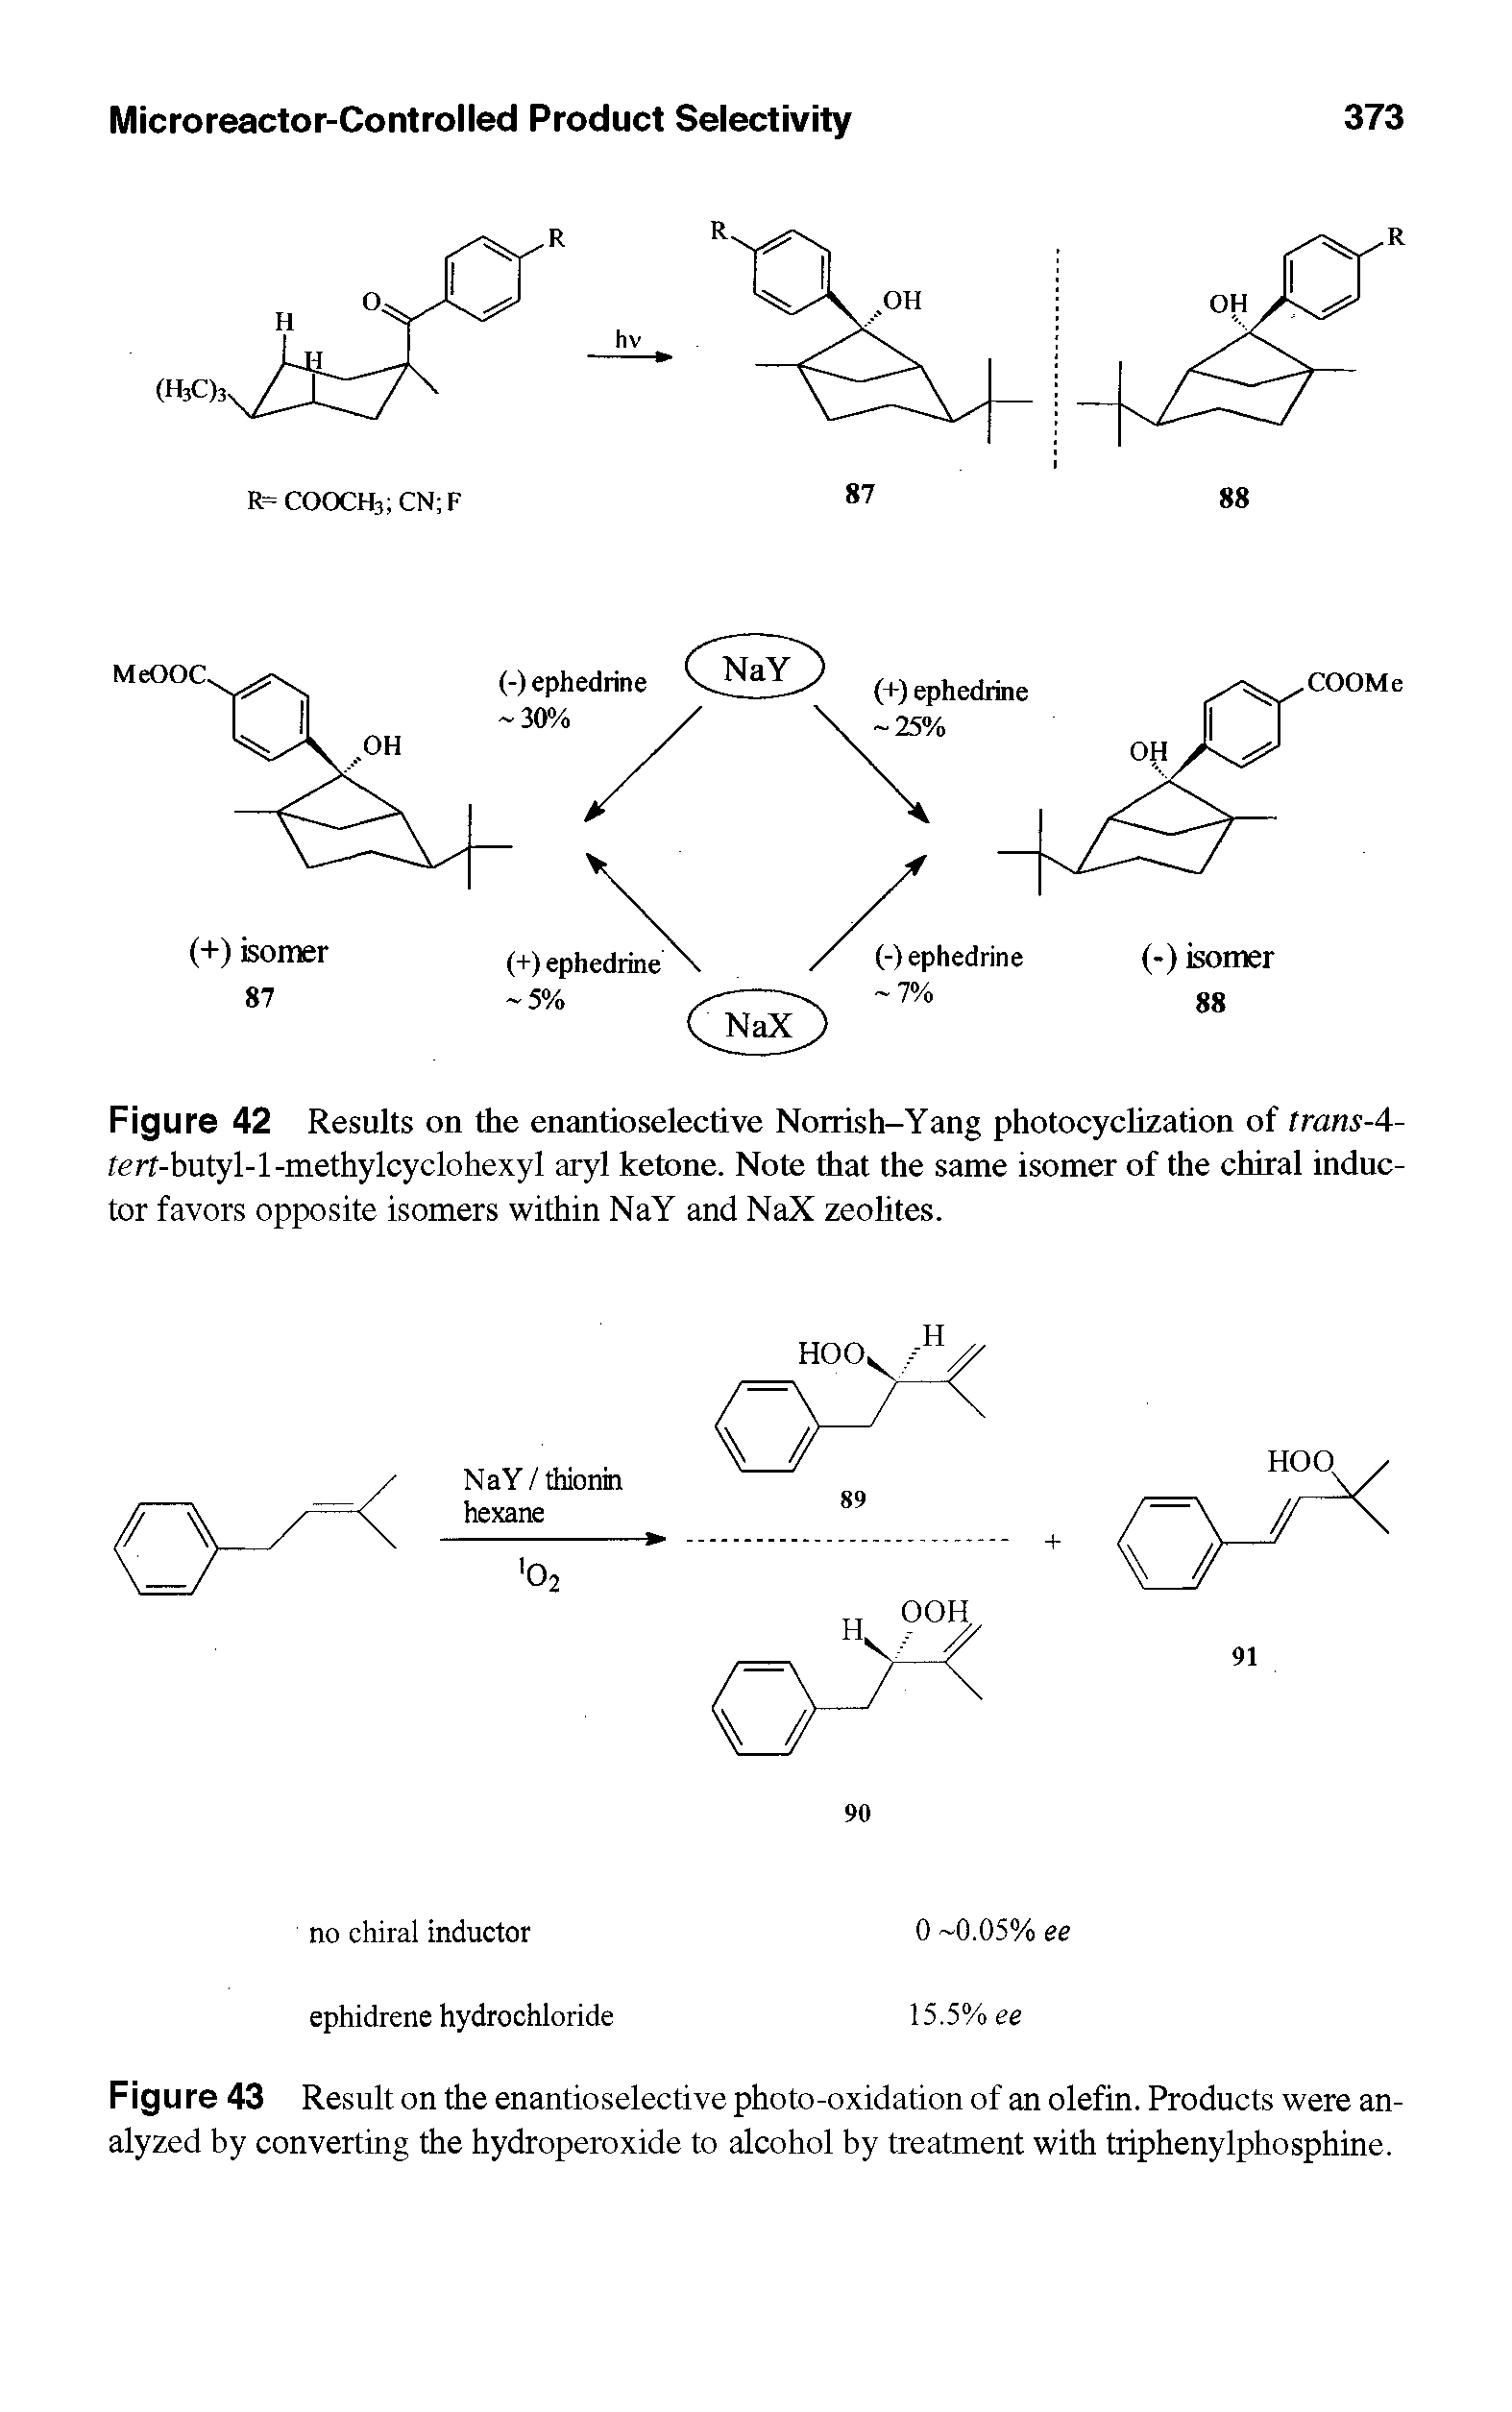 Figure 43 Result on the enantioselective photo-oxidation of an olefin. Products were analyzed by converting the hydroperoxide to alcohol by treatment with triphenylphosphine.